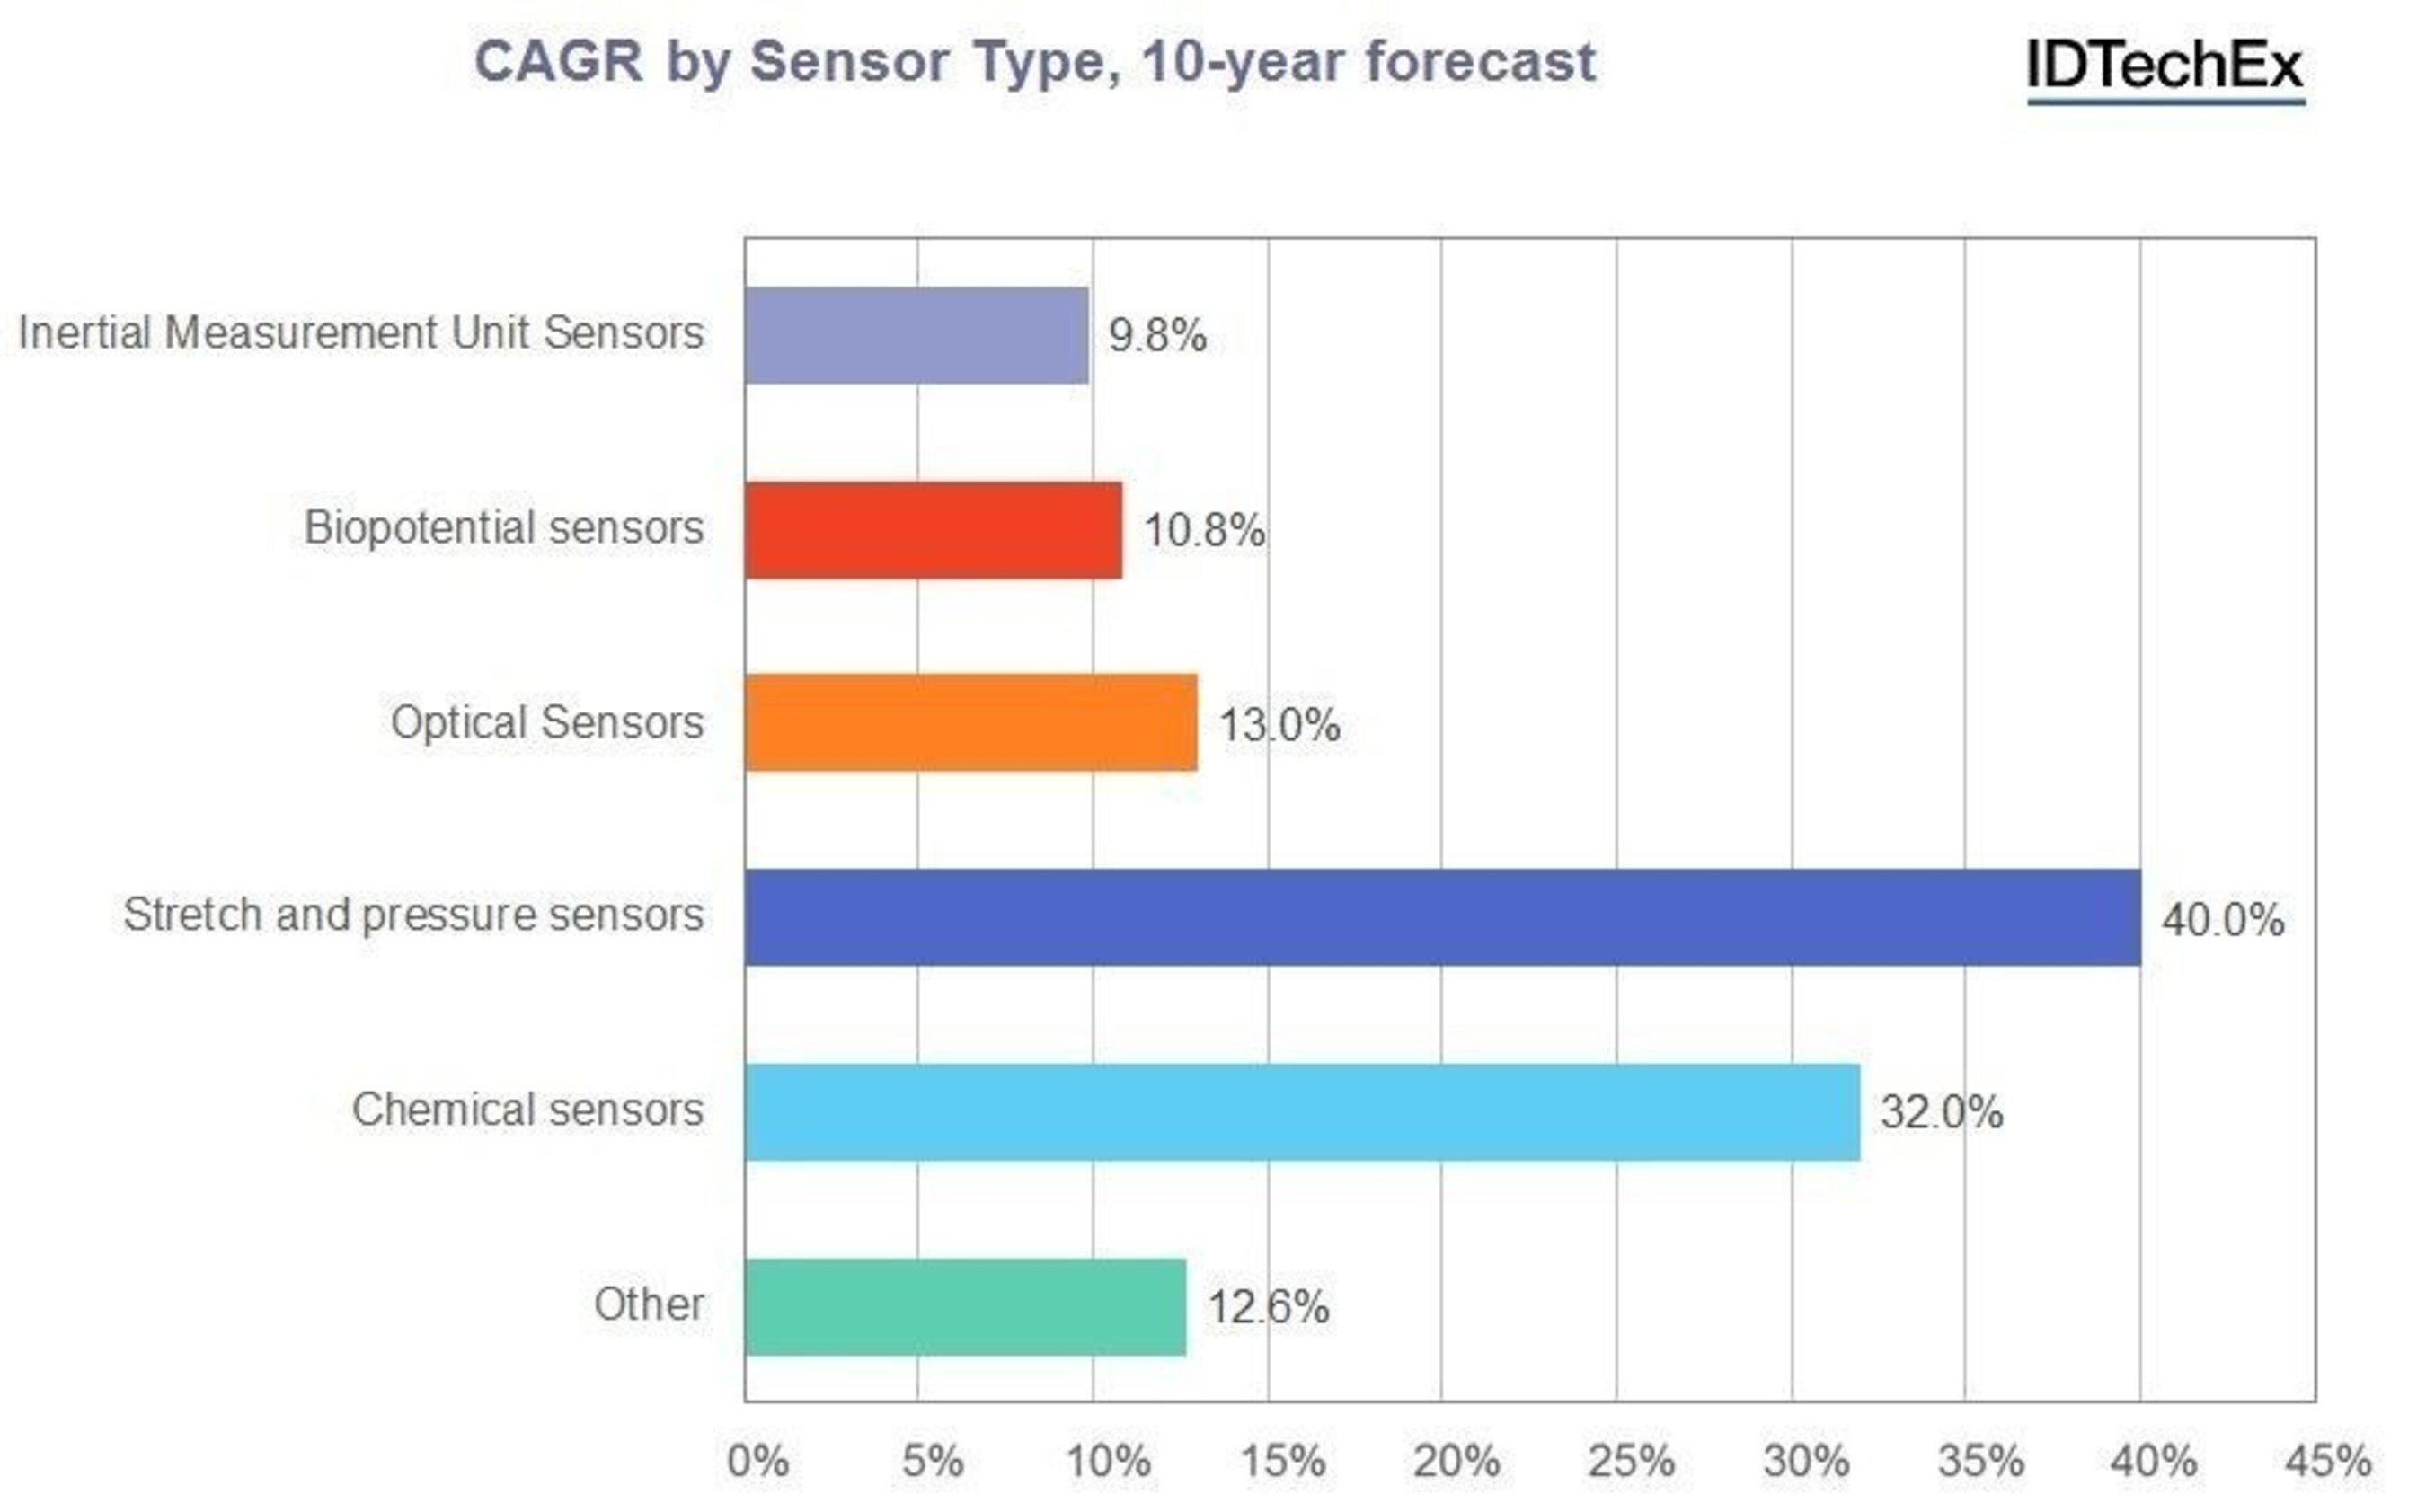 Growth rates summary for each sensor type. Source: IDTechEx Research report "Wearable Sensors 2016-2026: Market Forecasts, Technologies, Players" (www.IDTechEx.com/wtsensors). (PRNewsFoto/IDTechEx Research)